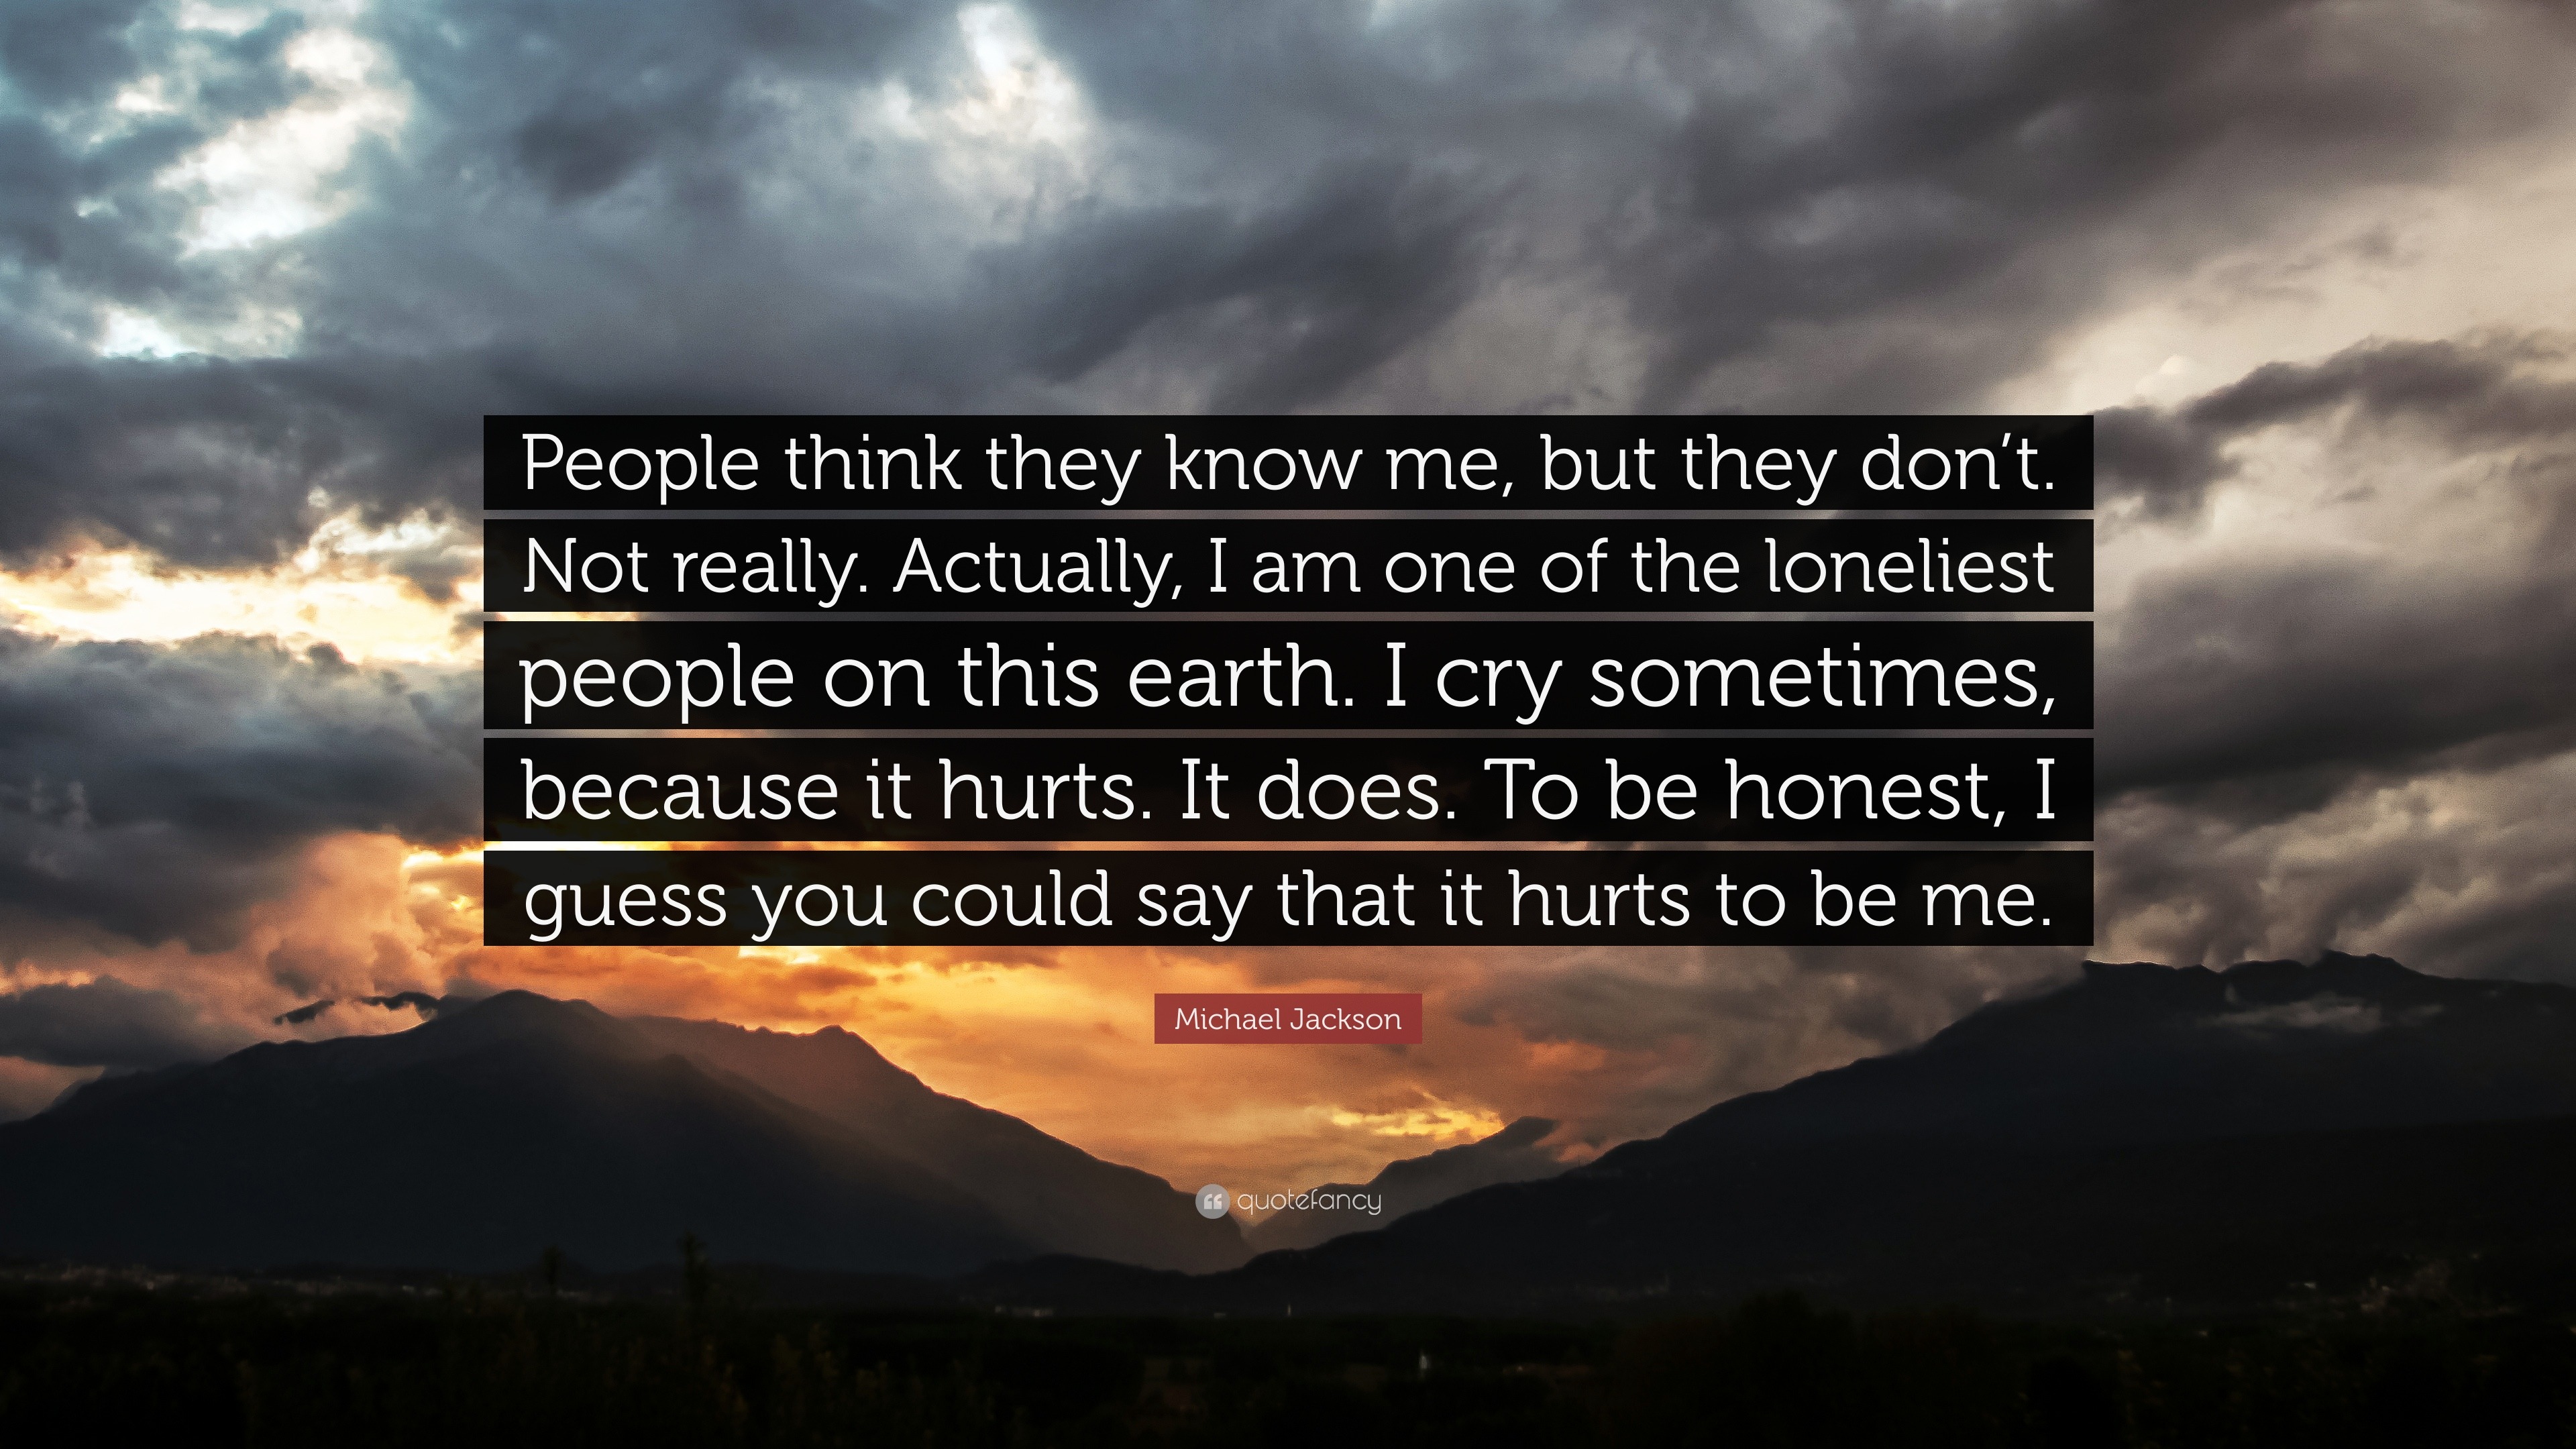 Michael Jackson Quote: “People think they know me, but they don’t. Not ...